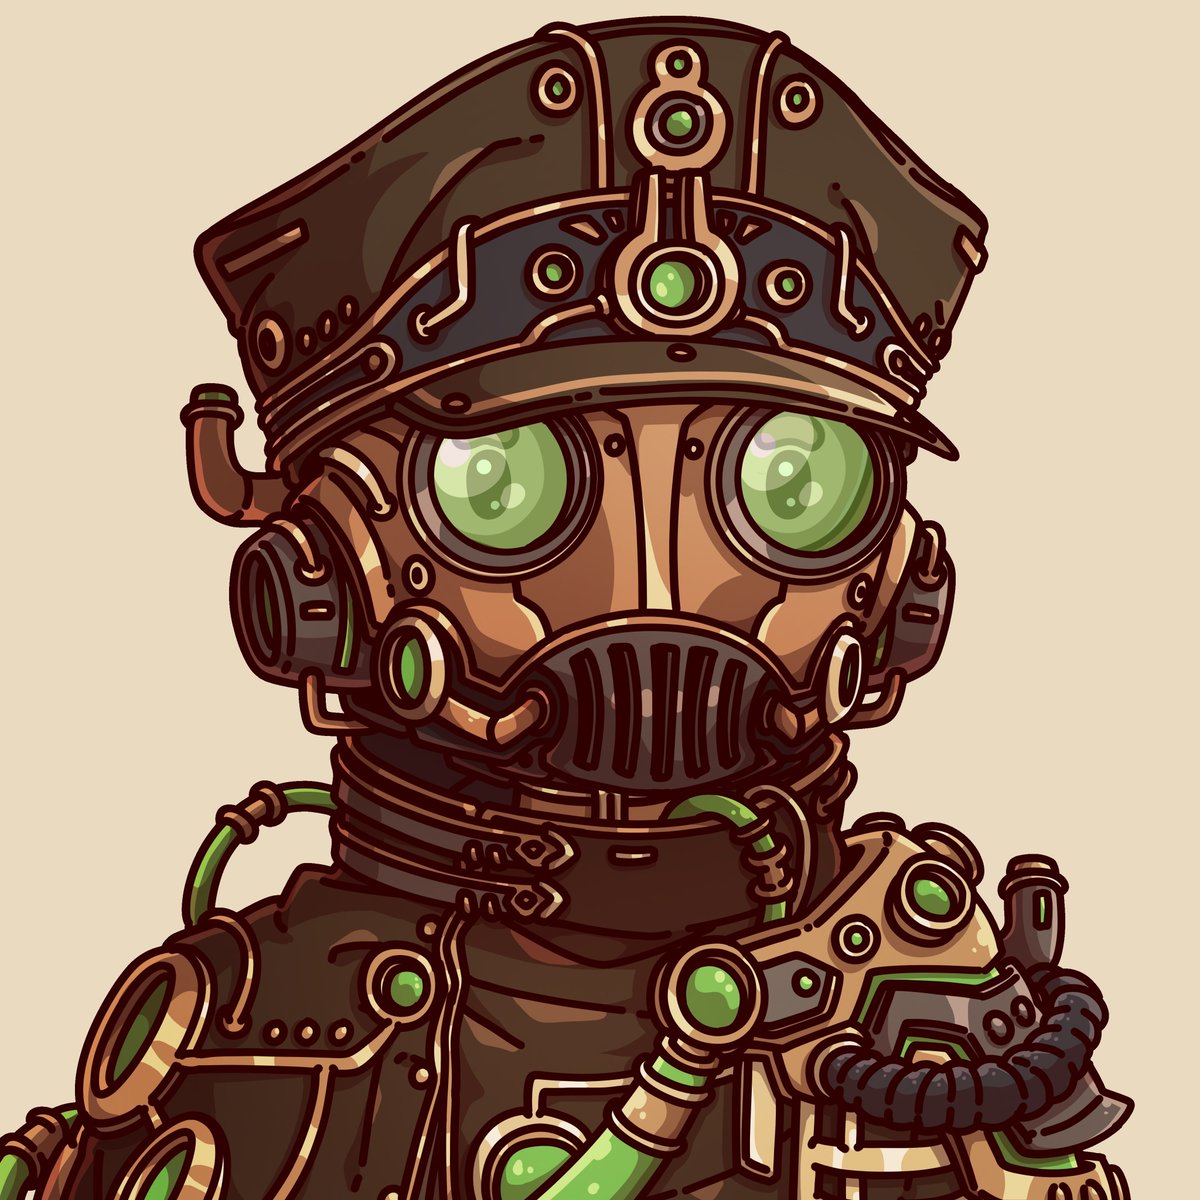 Our next world reveal -- Apemachina! 🌍🐵

The industrious Apes, masters of steampunk technology, have forged a society where brass and gears reign supreme.

The realm pulses with the harmonious symphony of whirling cogs and ticking timepieces - a realm of mechanical marvels.